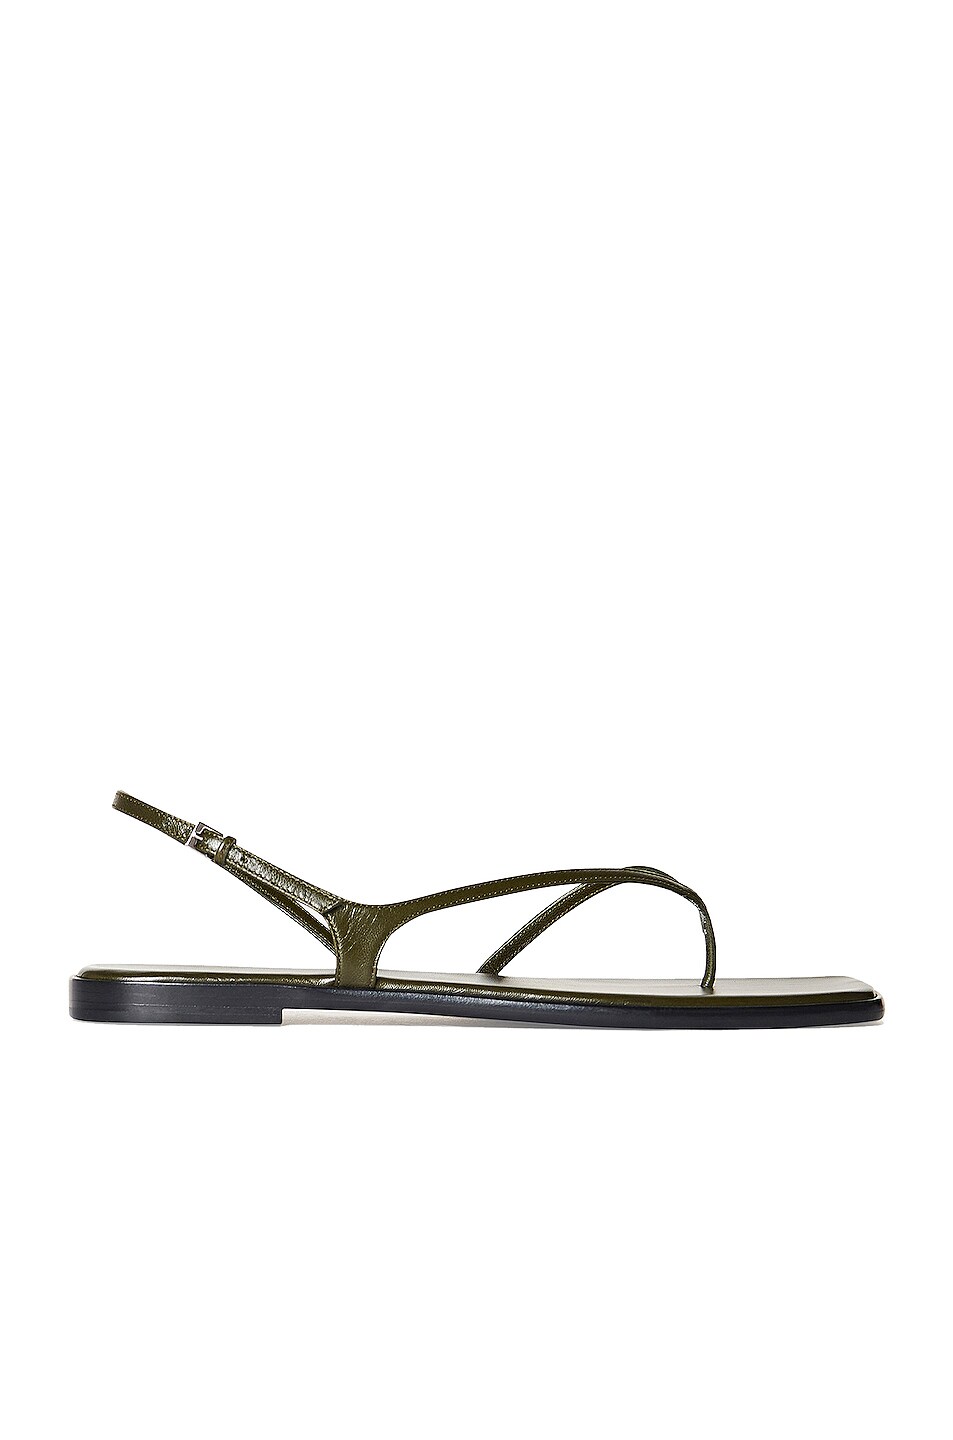 Image 1 of The Row Constance Leather Flat Sandals in Olive